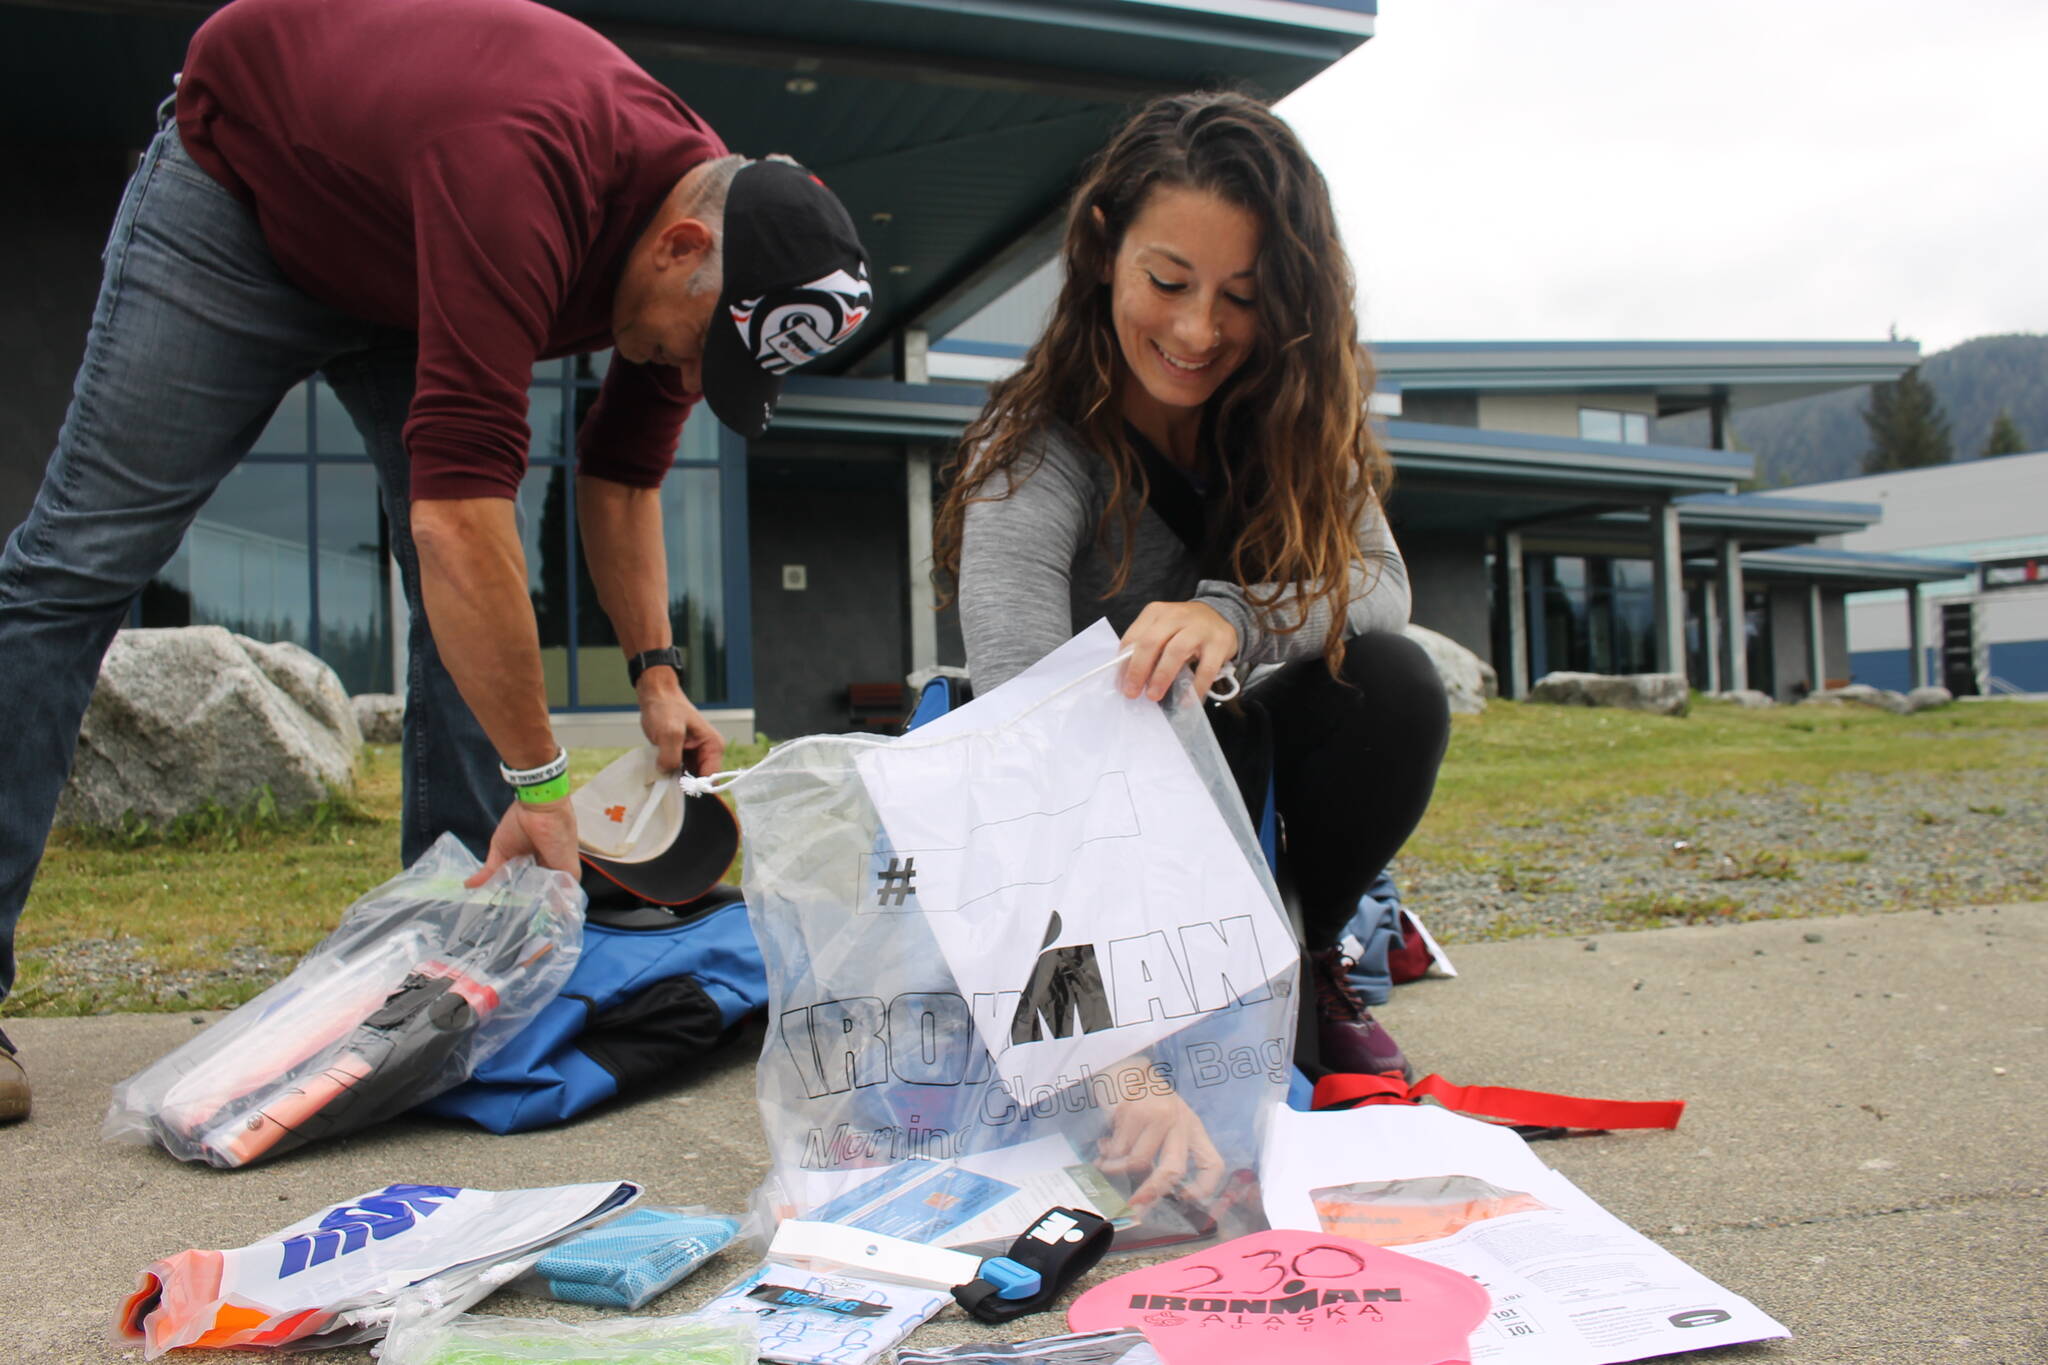 Genna Boragine shows off all her Ironman swag outside of the Ironman Village at Thunder Mountain High School. Racers and volunteers filled the high school as they registered and explored the expo. (Clarise Larson / Juneau Empire)